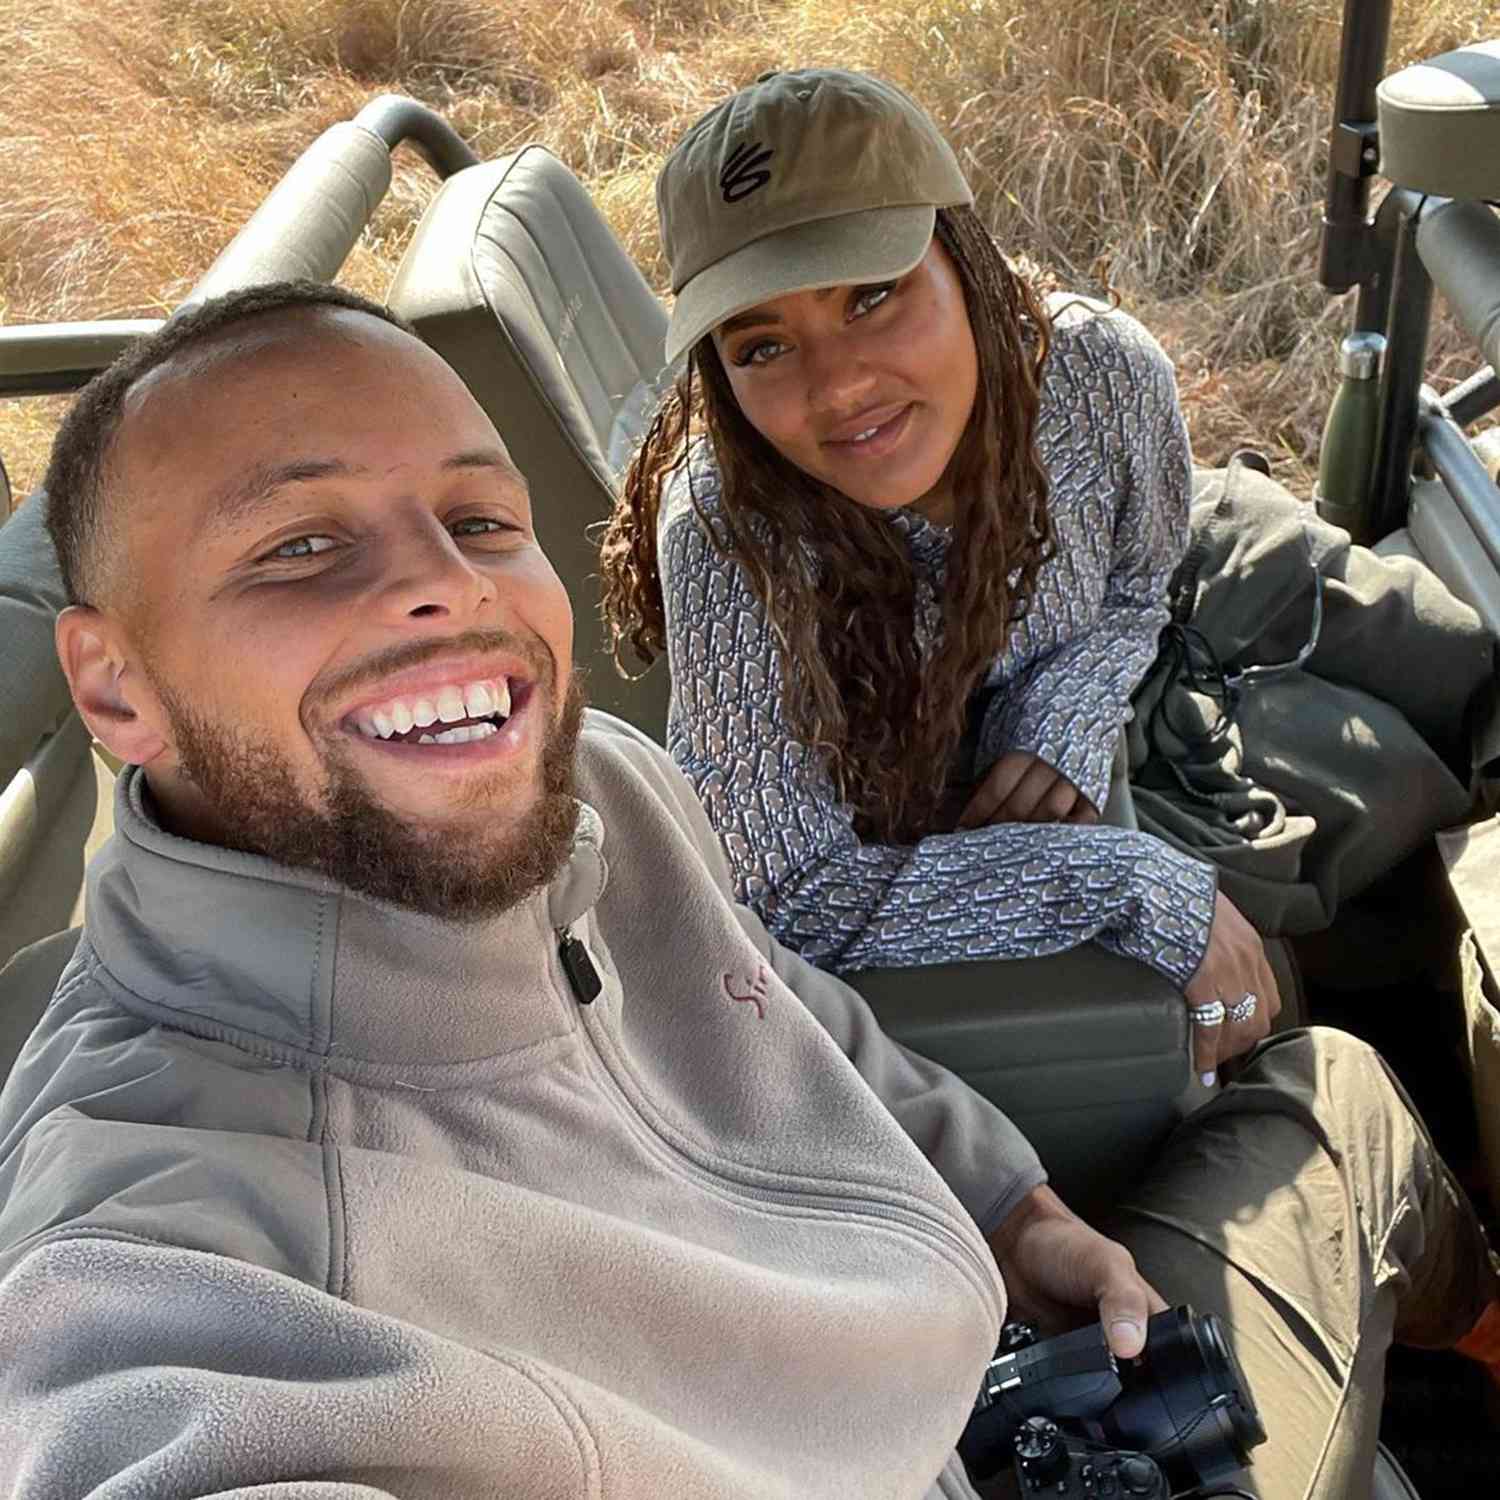 ChefLove! Stephen Curry threw his sweetie a 10-year wedding anniversary celebration with Ayesha Curry